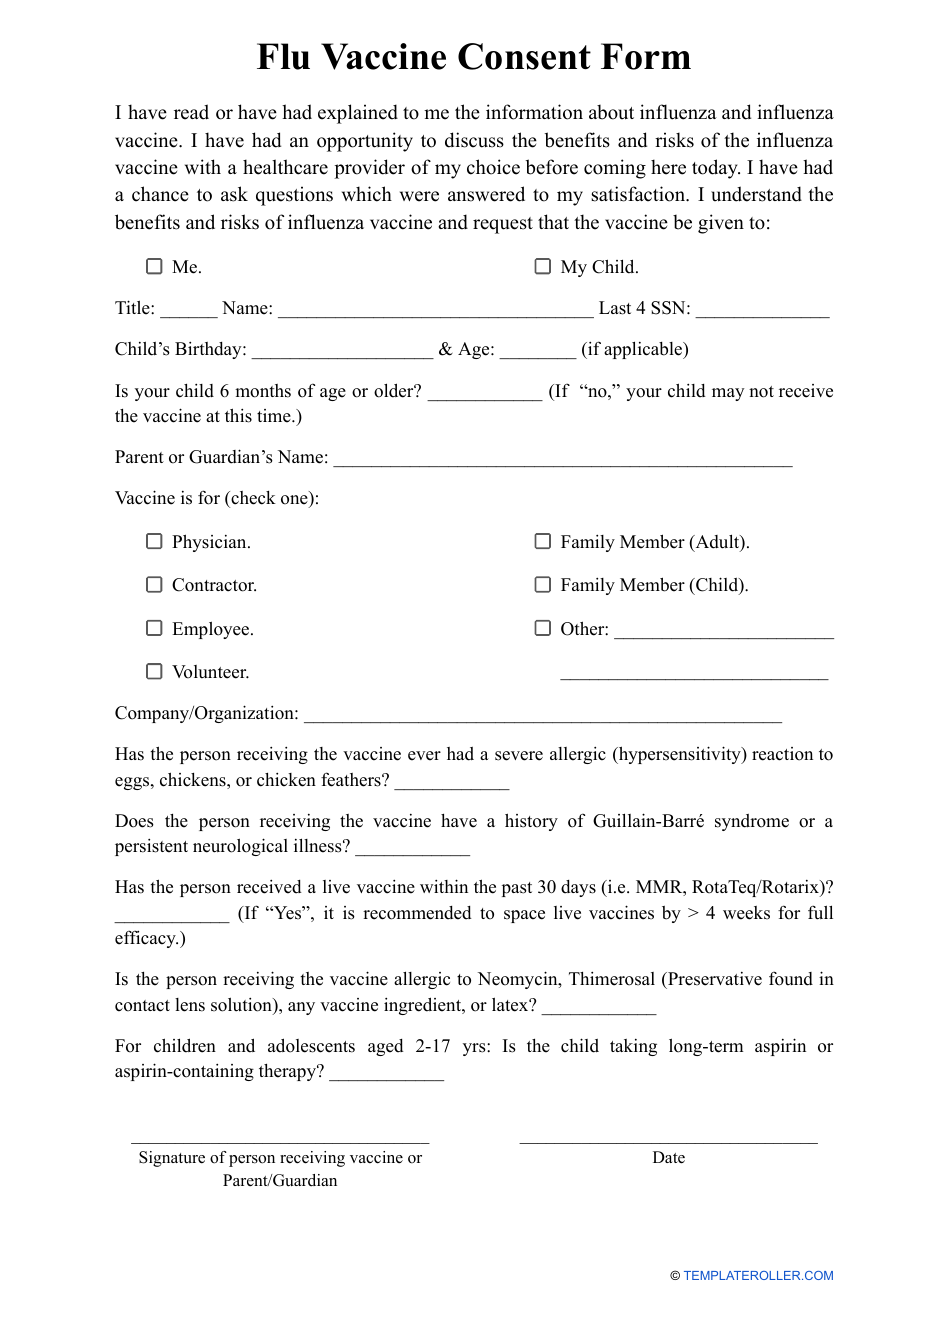 Flu Vaccine Consent Form, Page 1